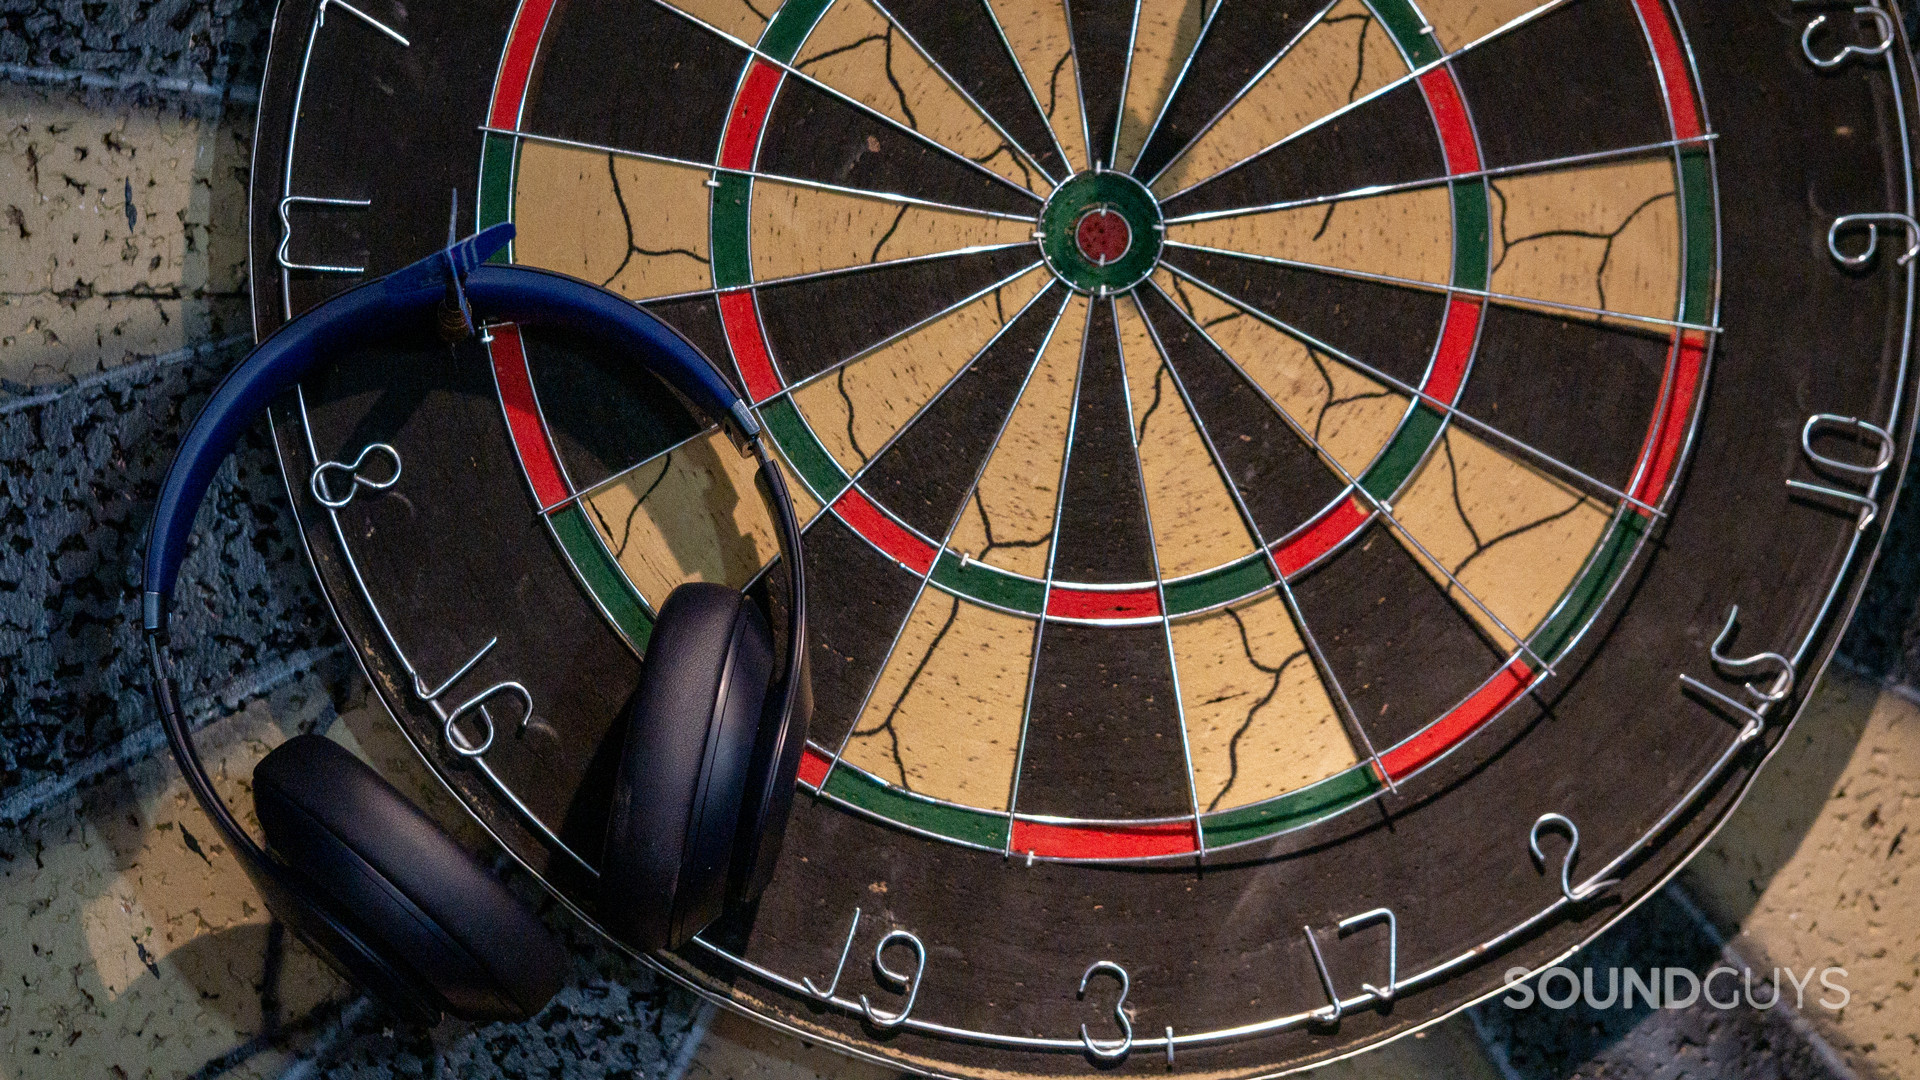 The Beats Studio Pro hanging from a dart, thrown aside of the dartboard.